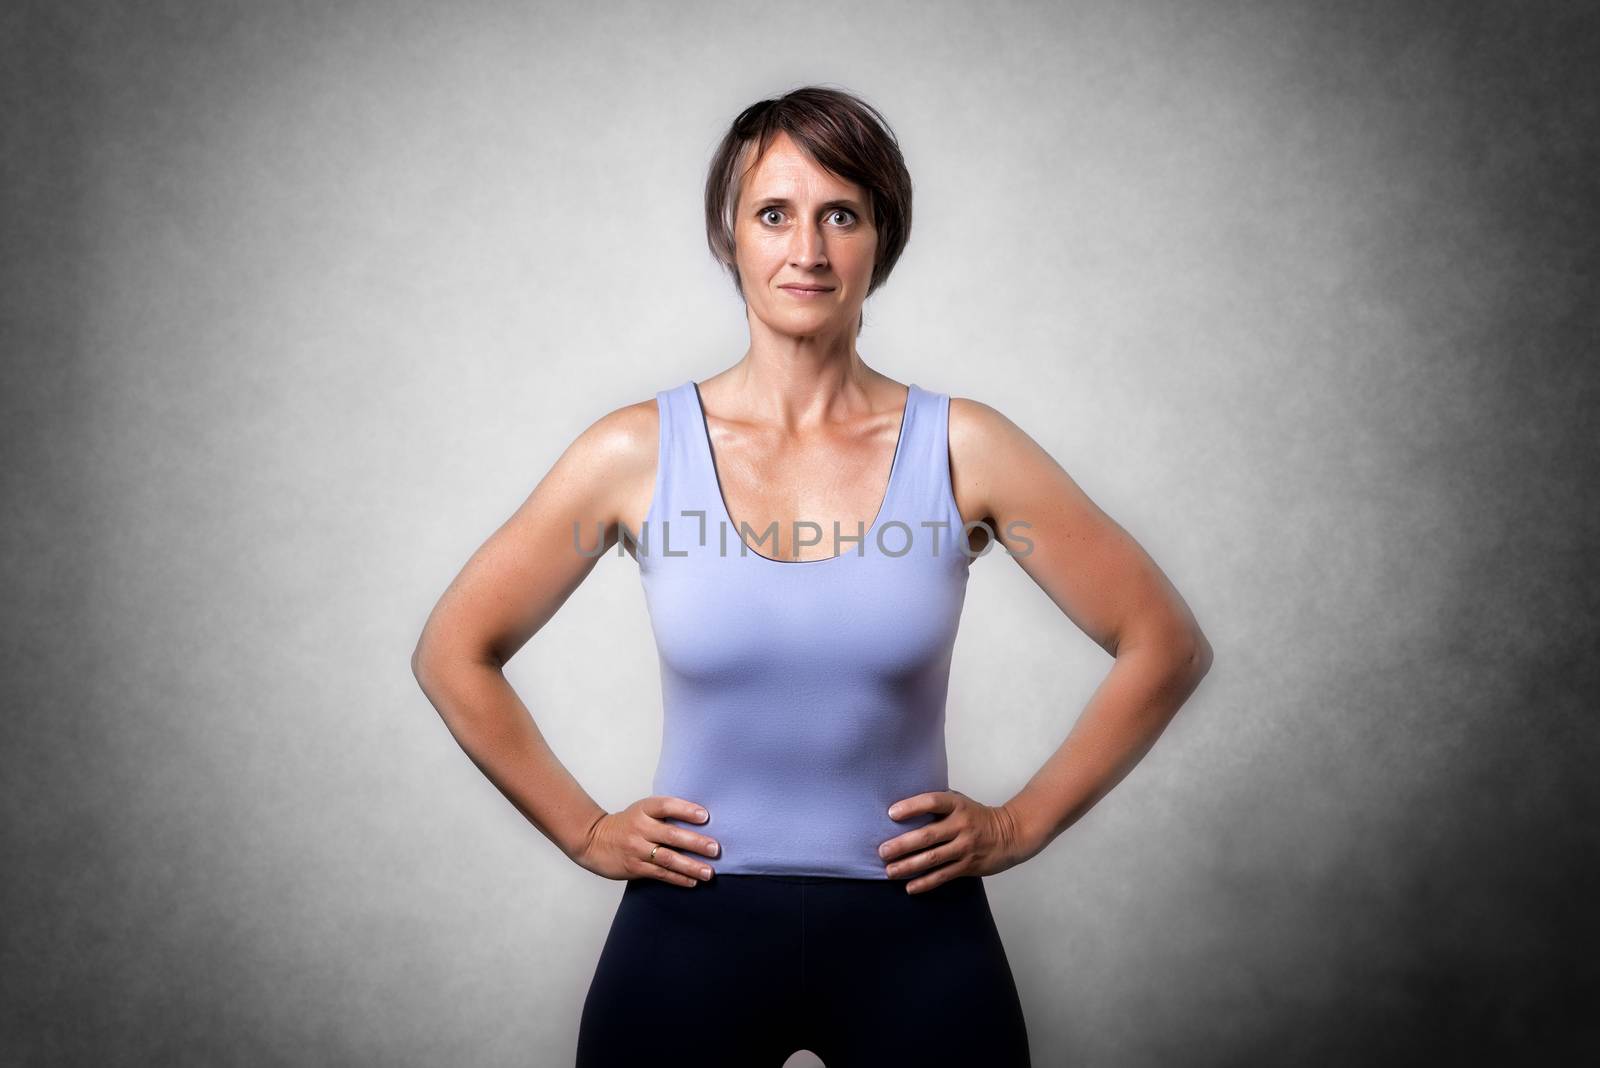 Image of middle aged confident woman in sportswear